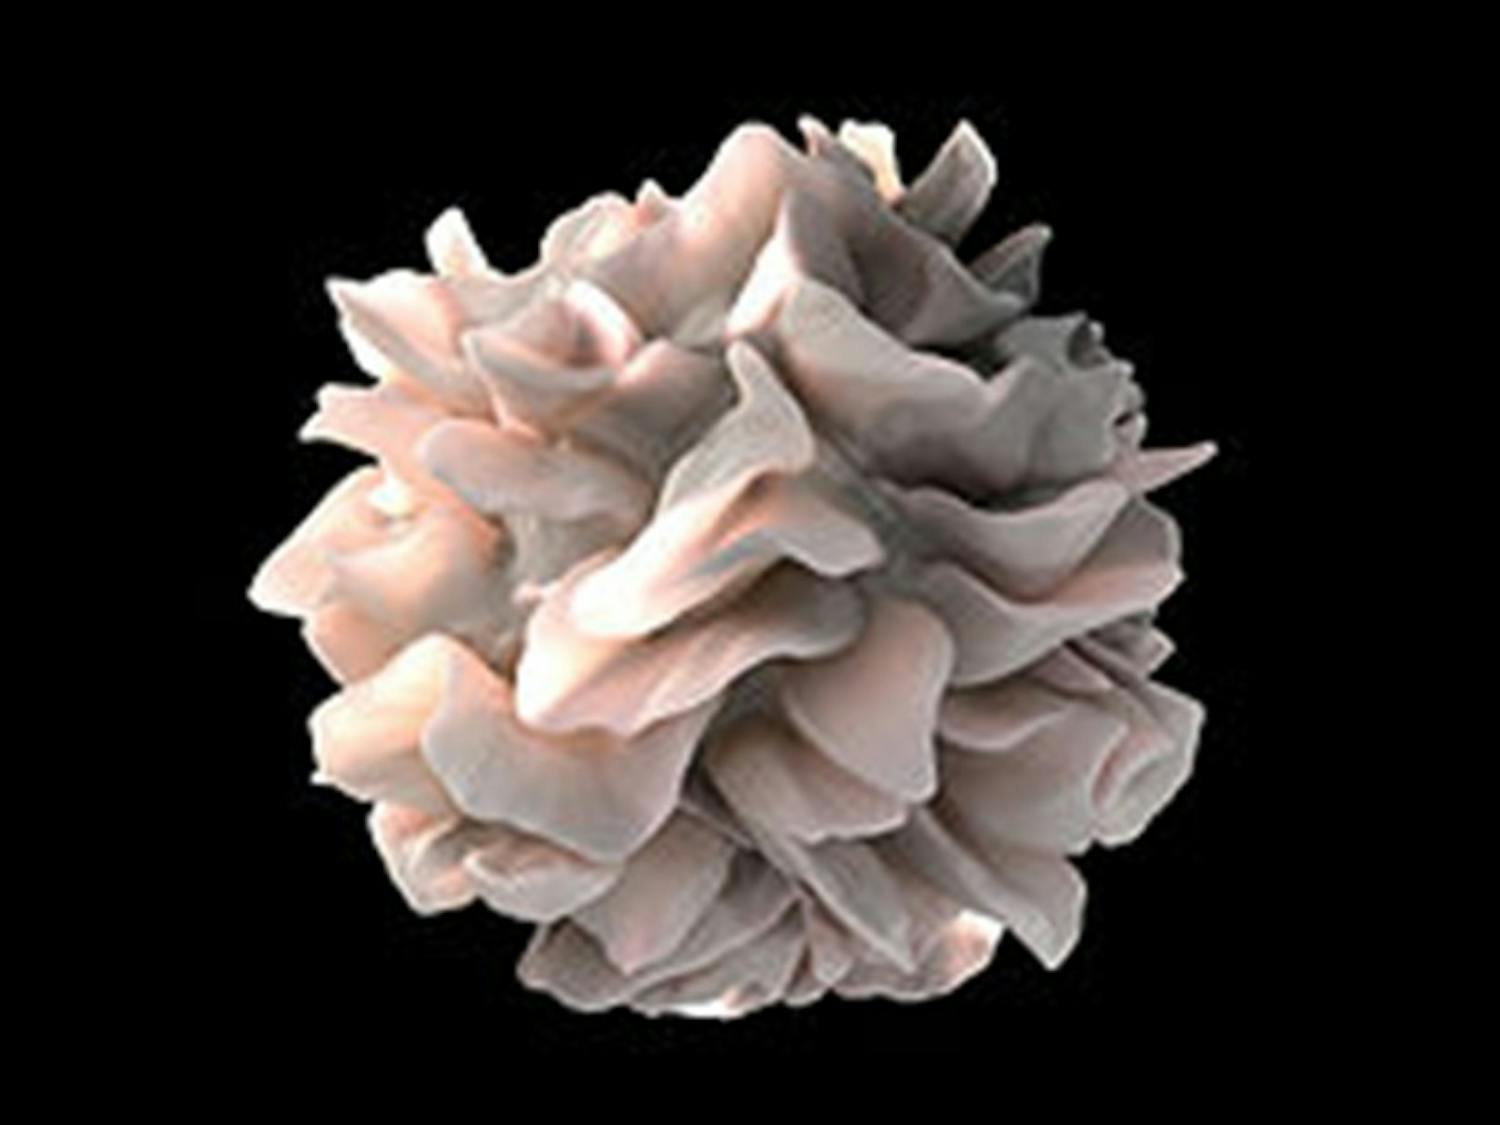 Artistic rendering of a dendritic cell